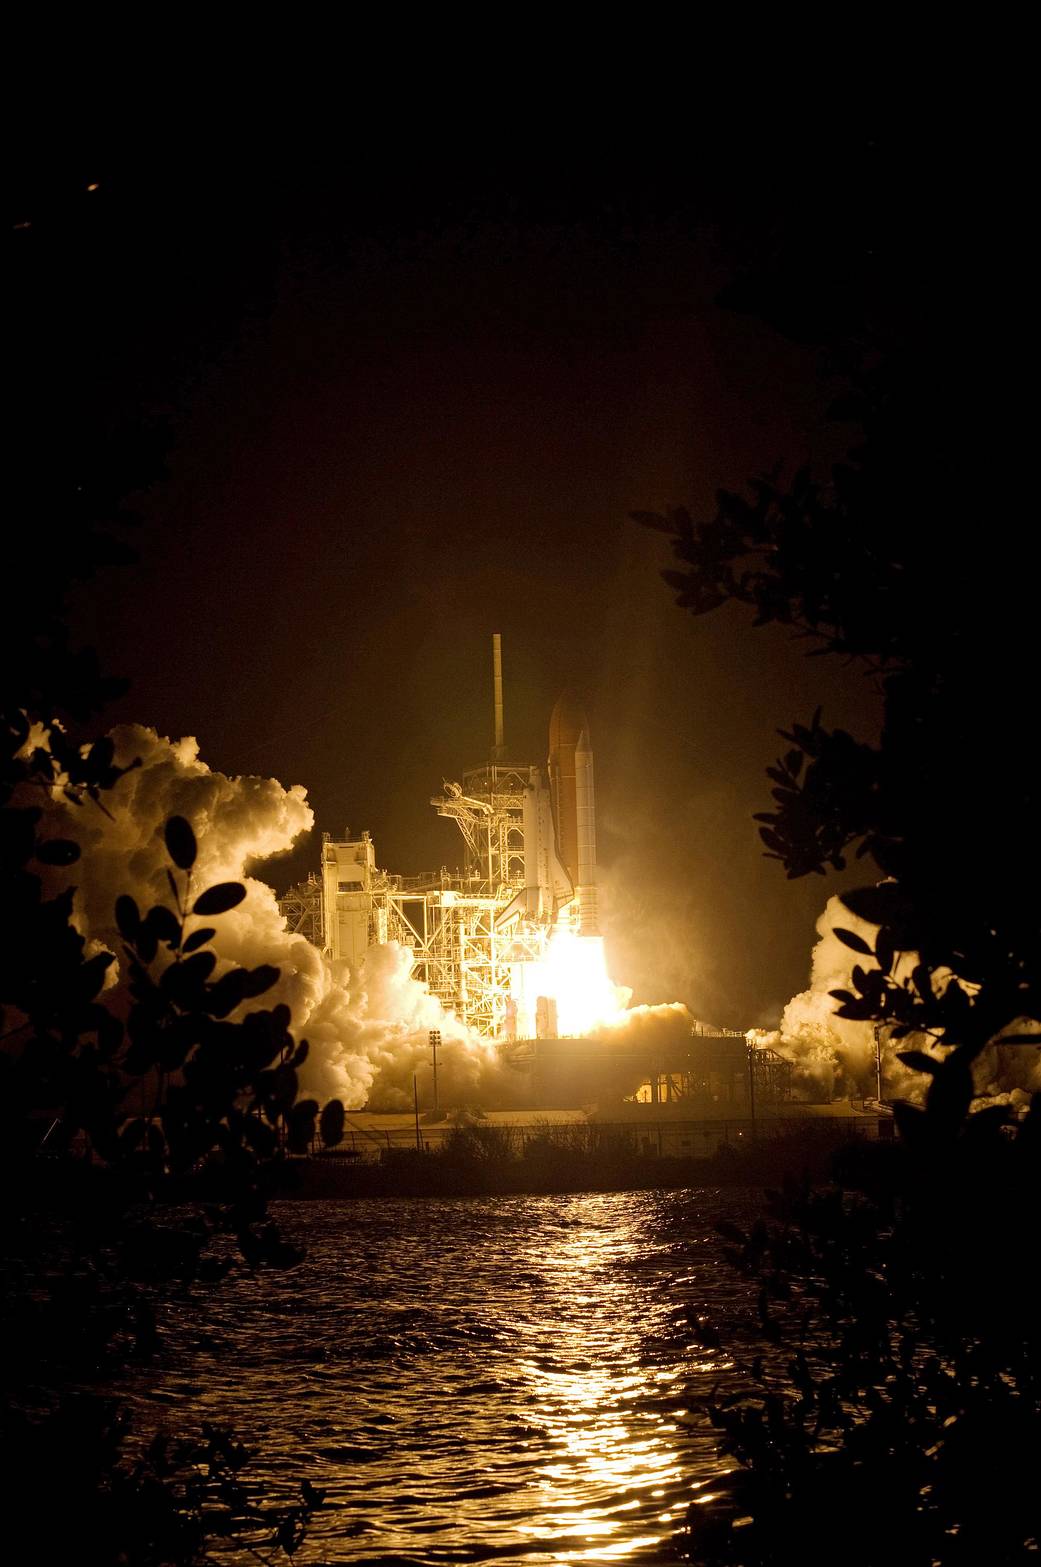 Fiery nighttime launch of shuttle Endeavour with foliage in the foreground at side of frame